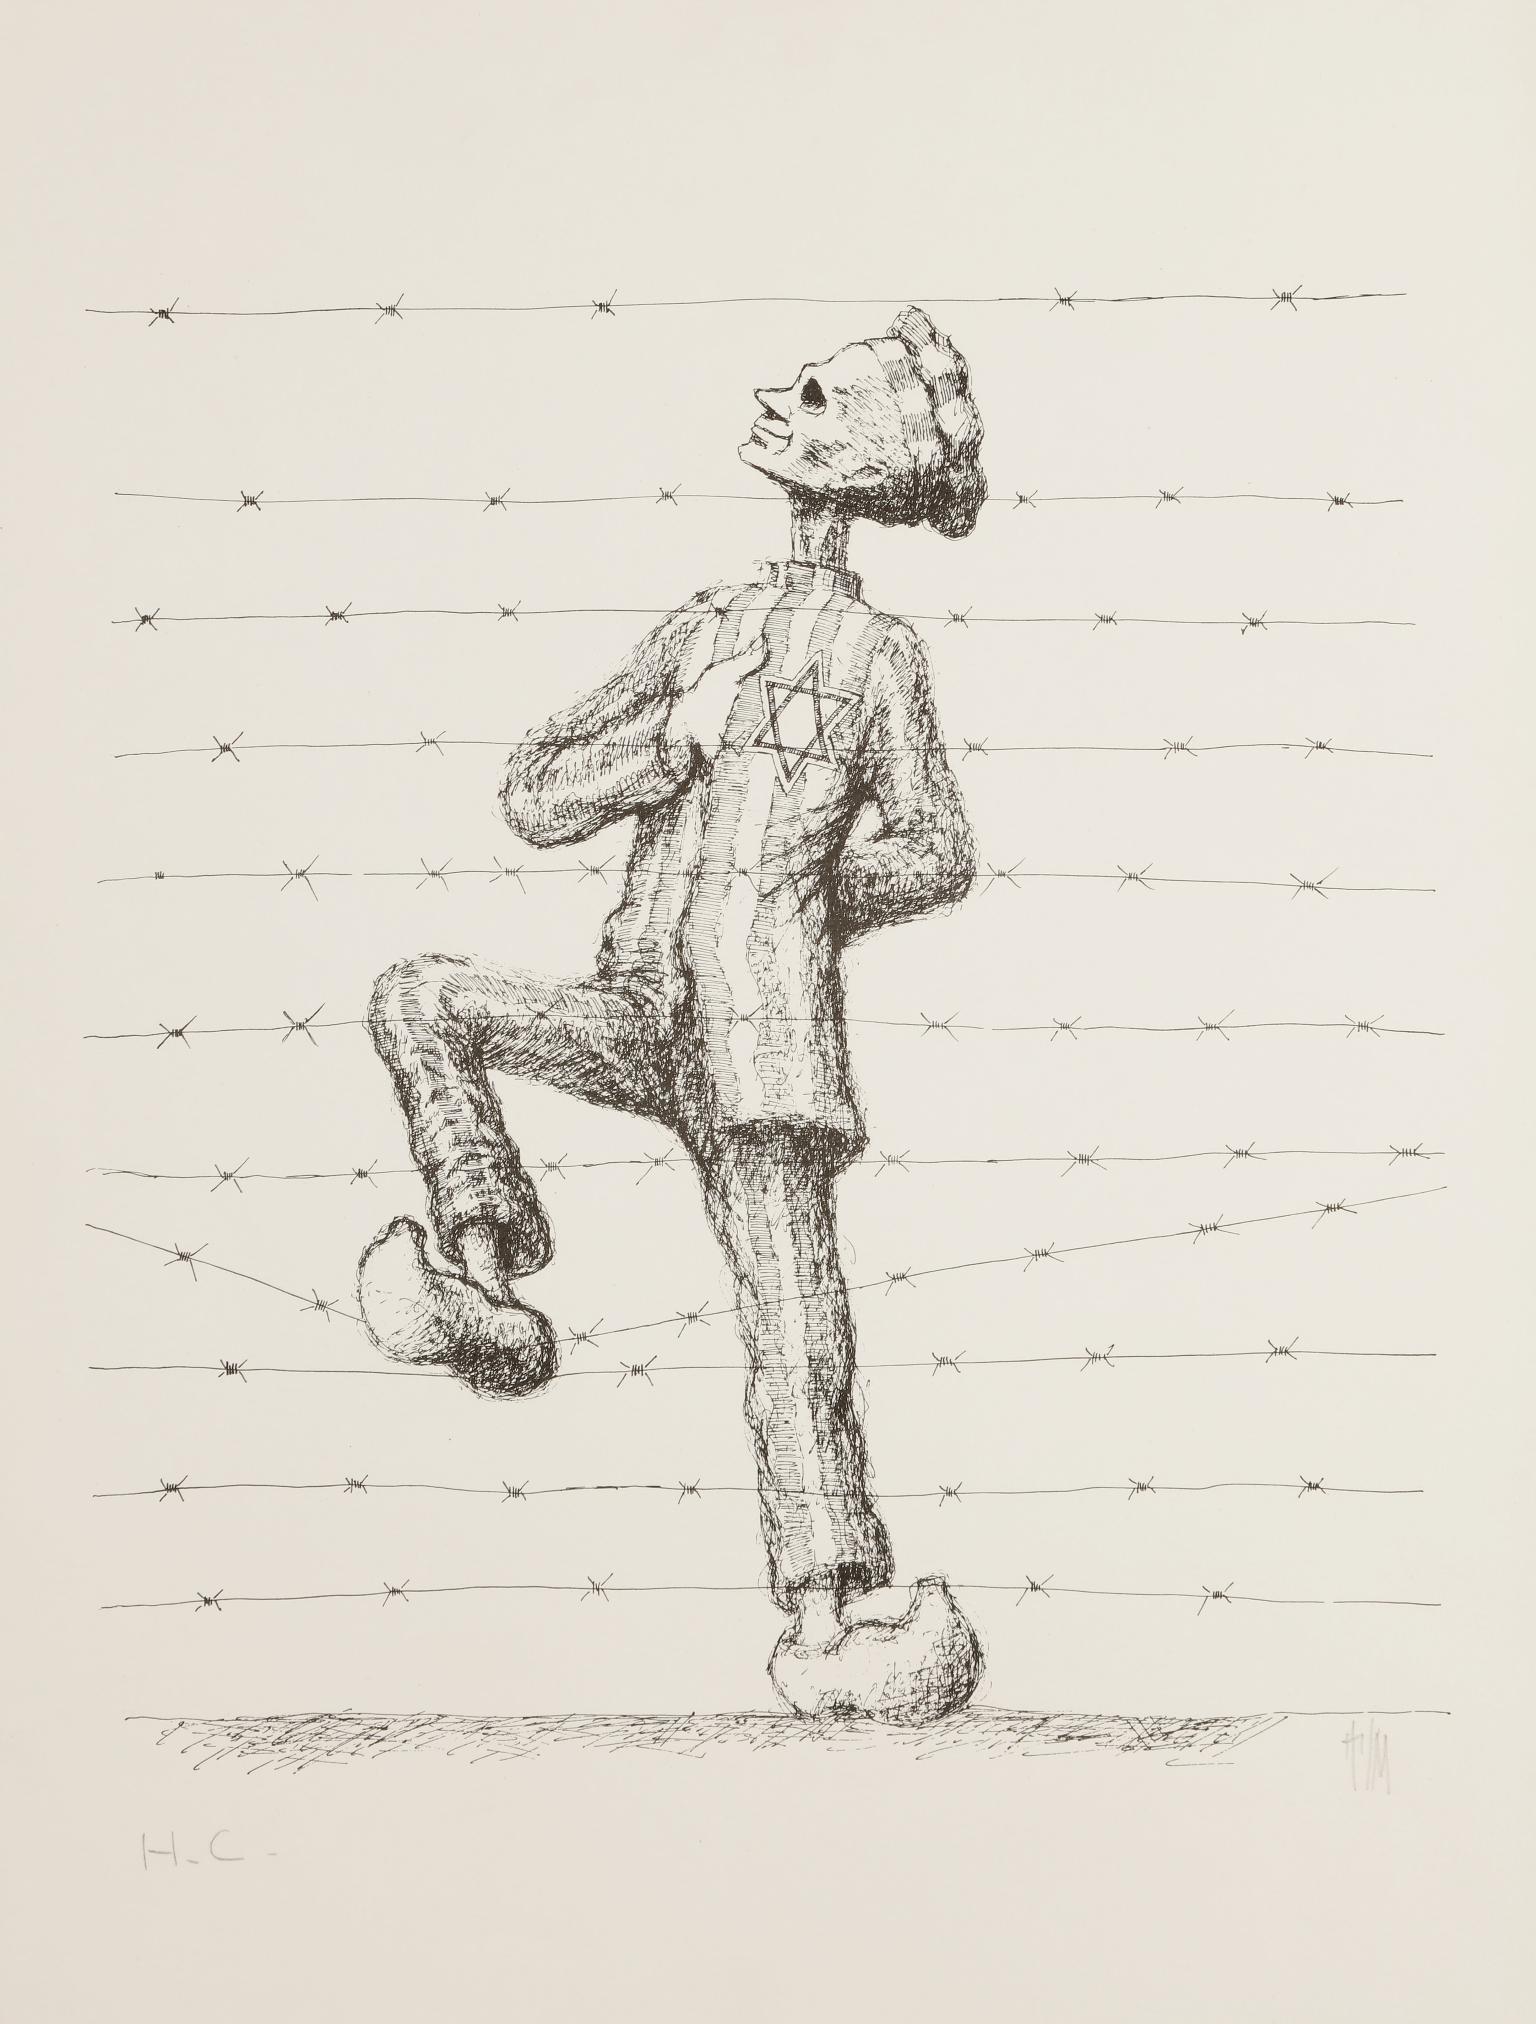 Drawing of full body profile of man behind barbed wire with foot propped on wire, dressed in prisoner uniform with Star of David badge on breast and right hand tucked in uniform.